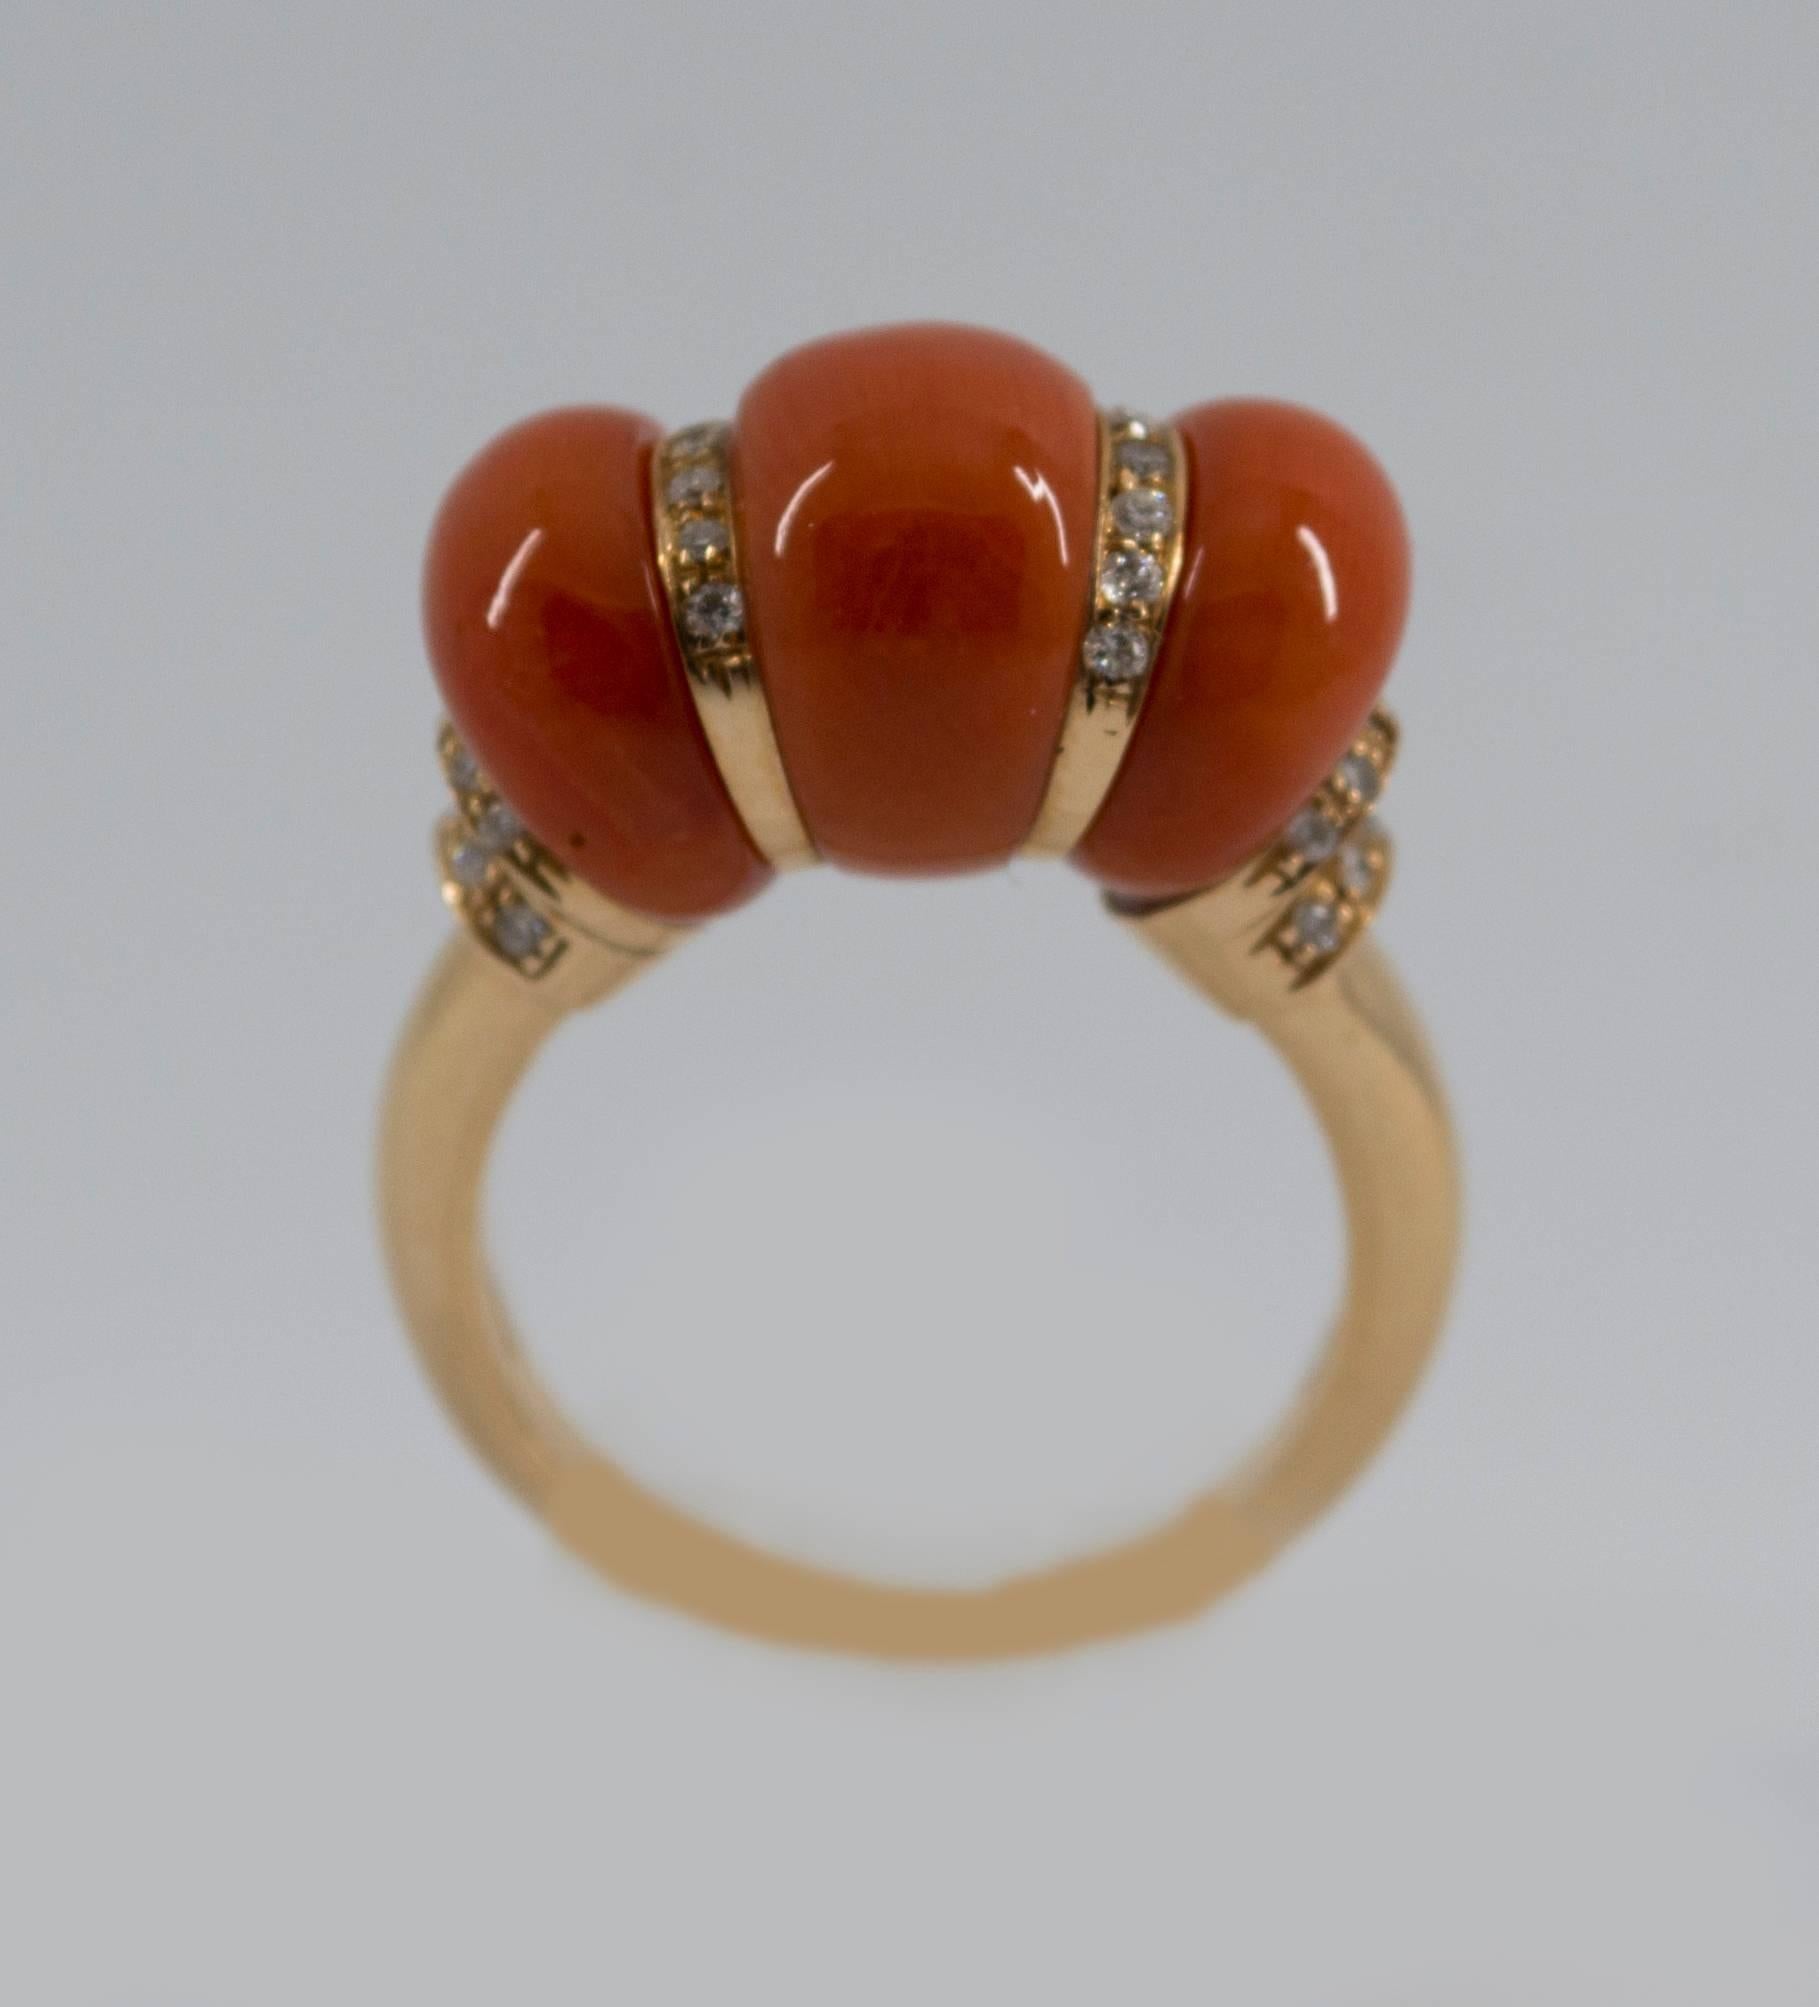 This ring is made of 14K Yellow Gold.
This ring has Coral and 0.35 Carats of Diamonds.
Size ITA: 15 Size USA: 7
We're a workshop so every piece is handmade, customizable and resizable.